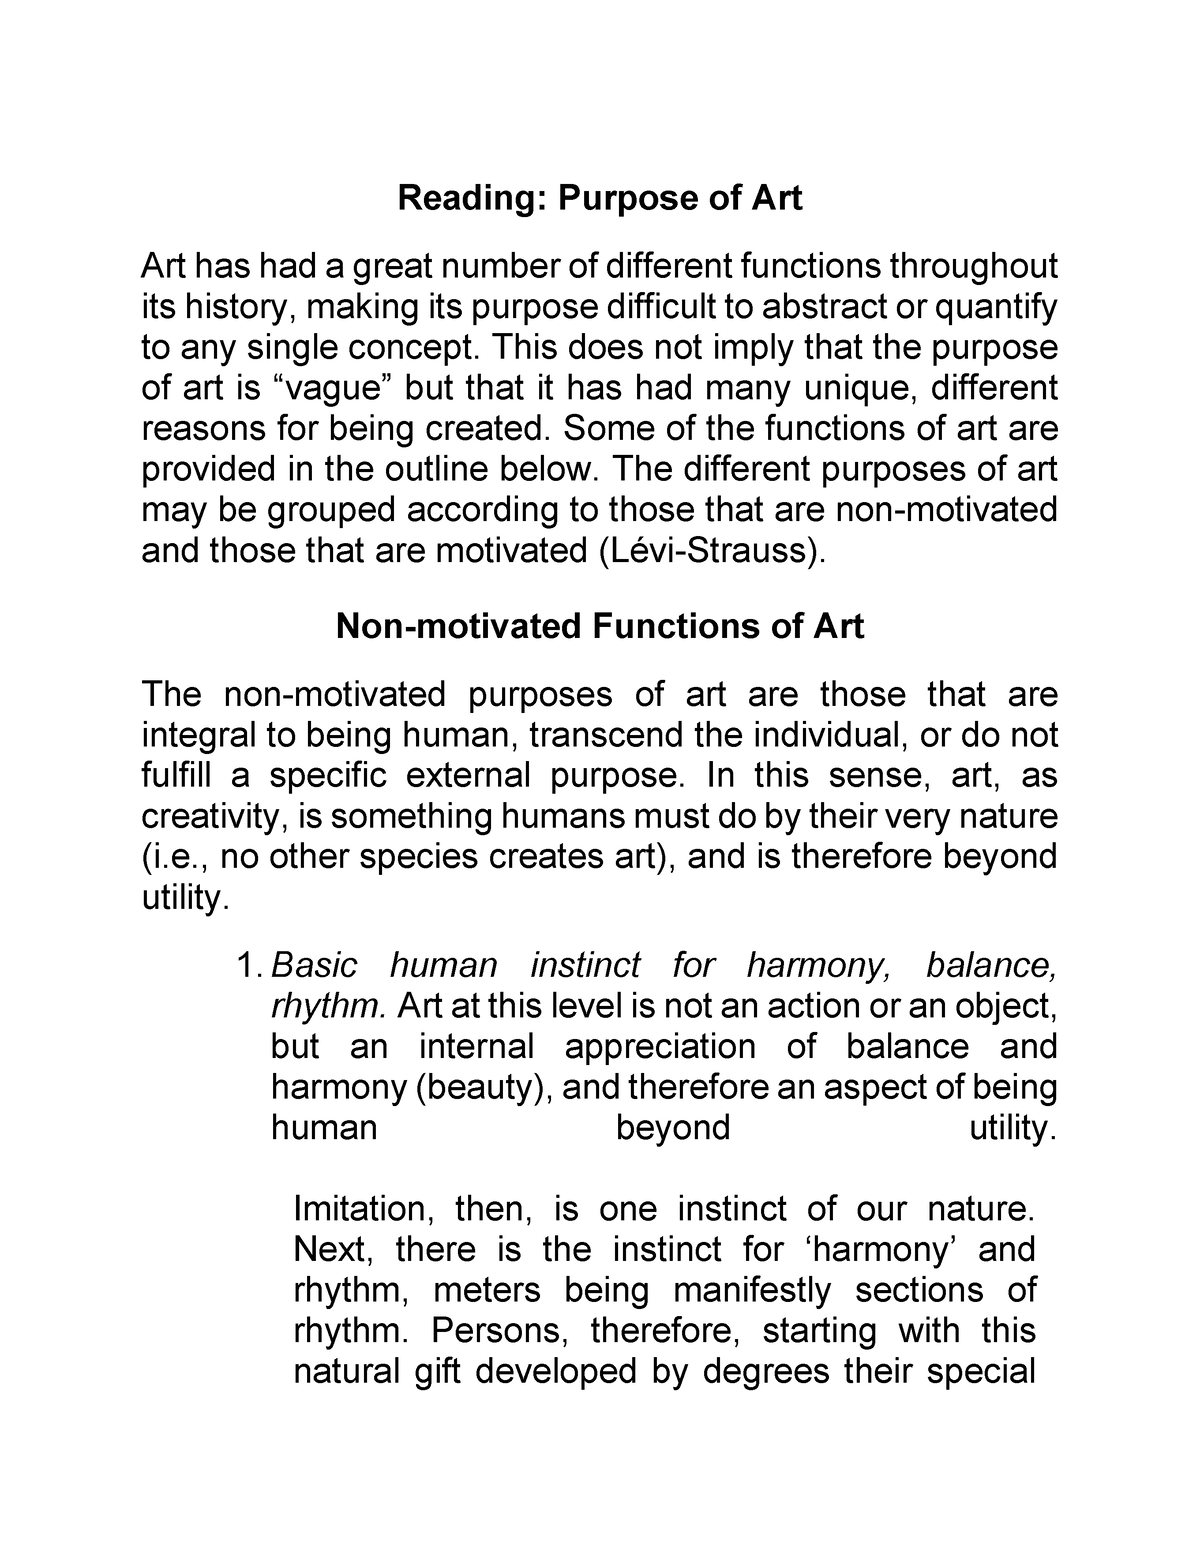 meaning of art essay